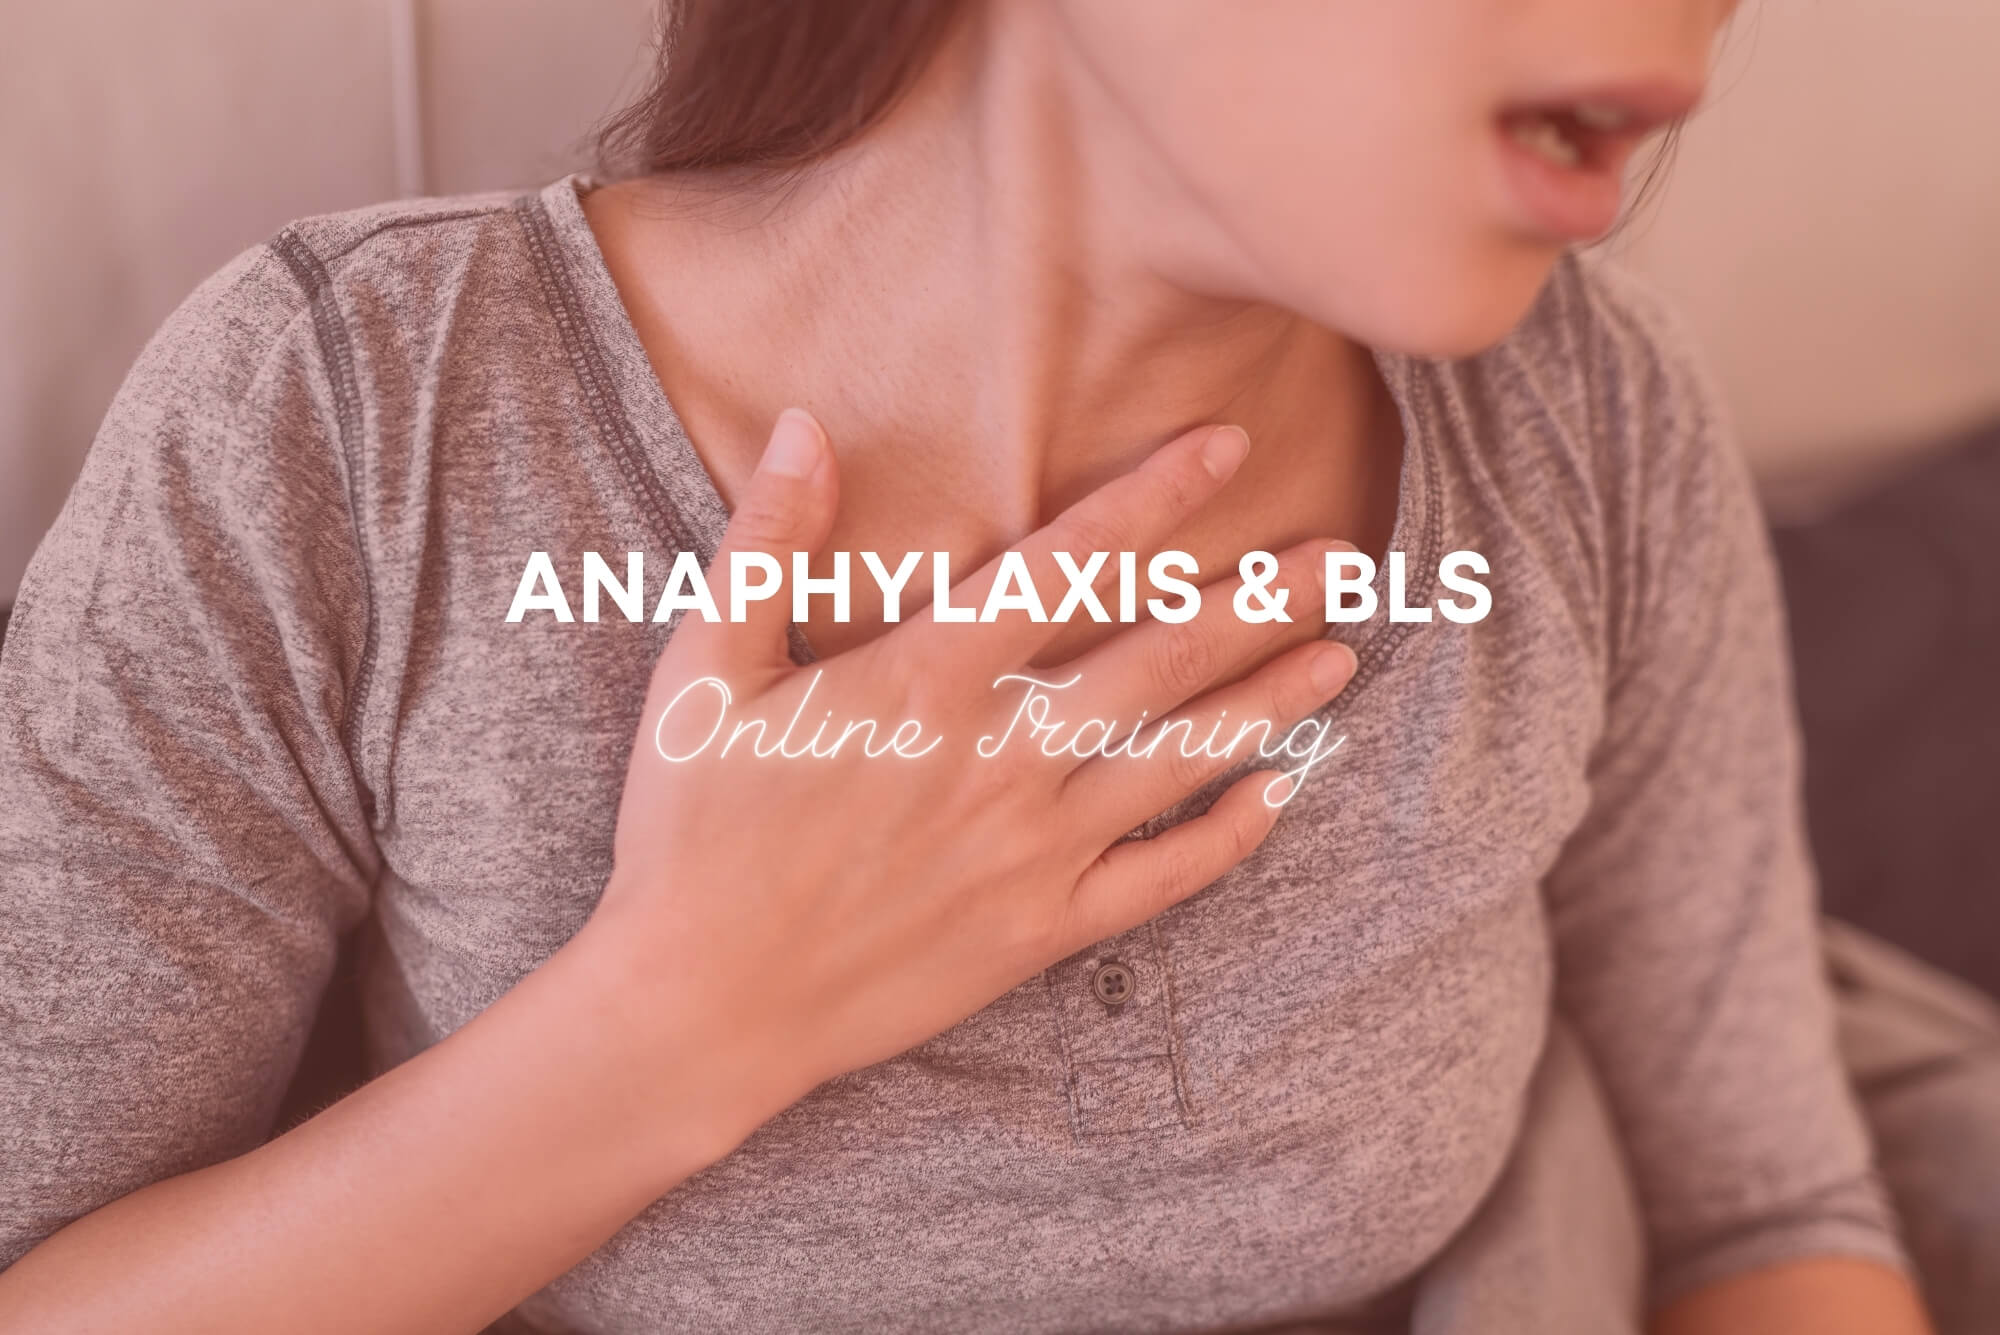 Anaphylaxis & BLS